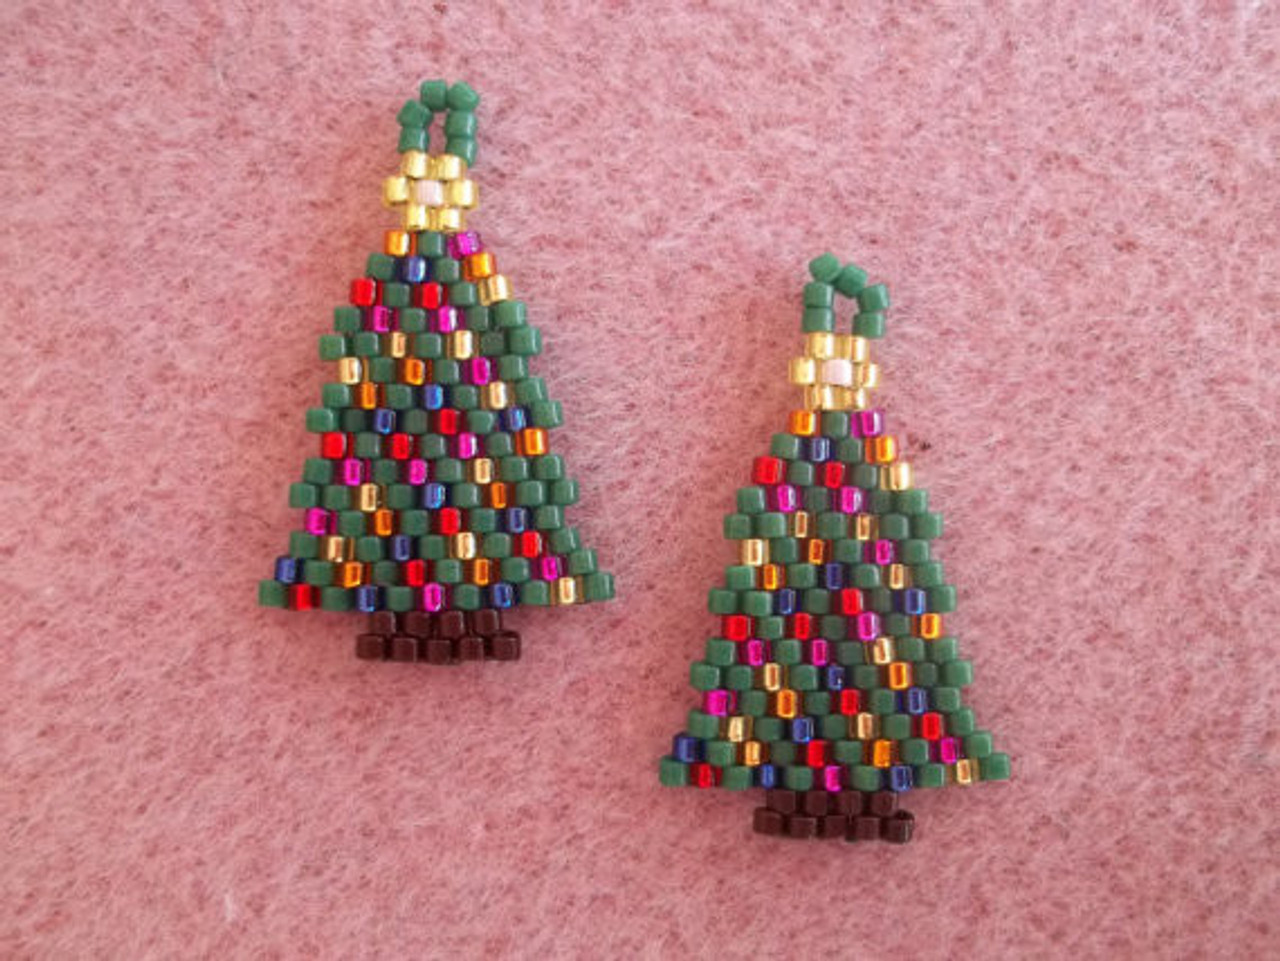 Christmas Tree with Lights Brick Stitch Earrings Graph PRINTED Tutorial - Mailed to your Home